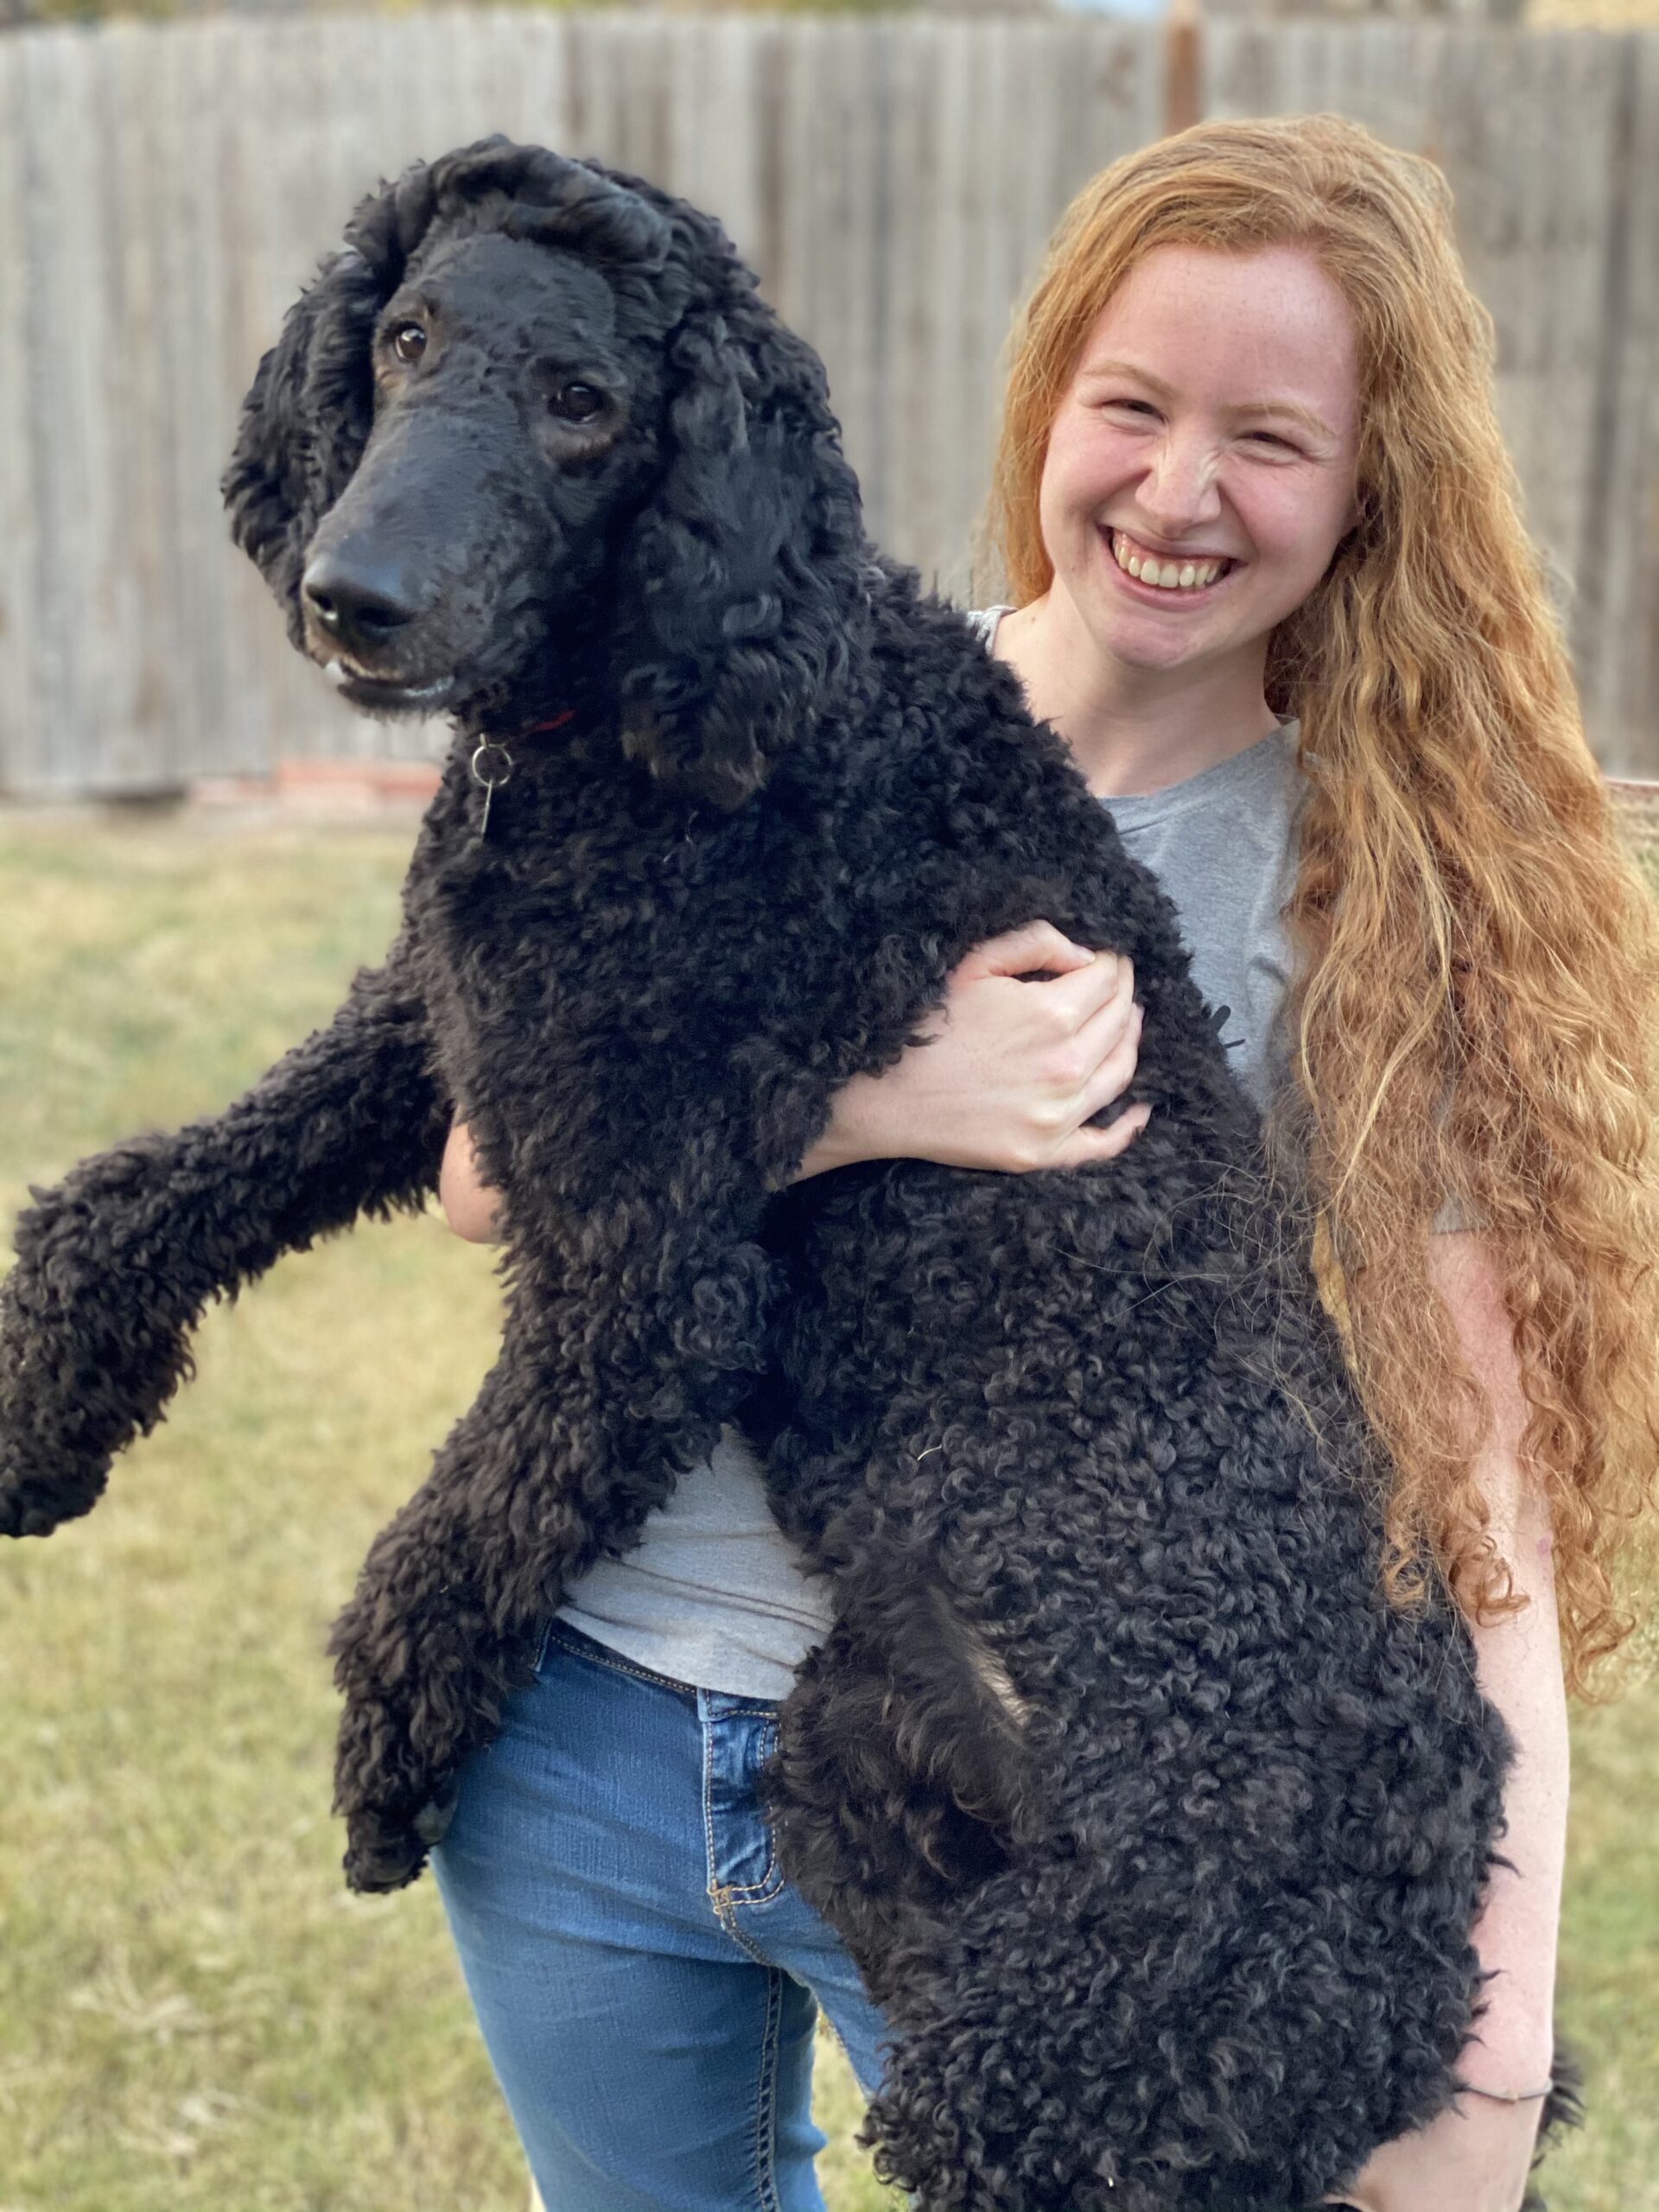 Redheaded young woman holding black poodle puppy